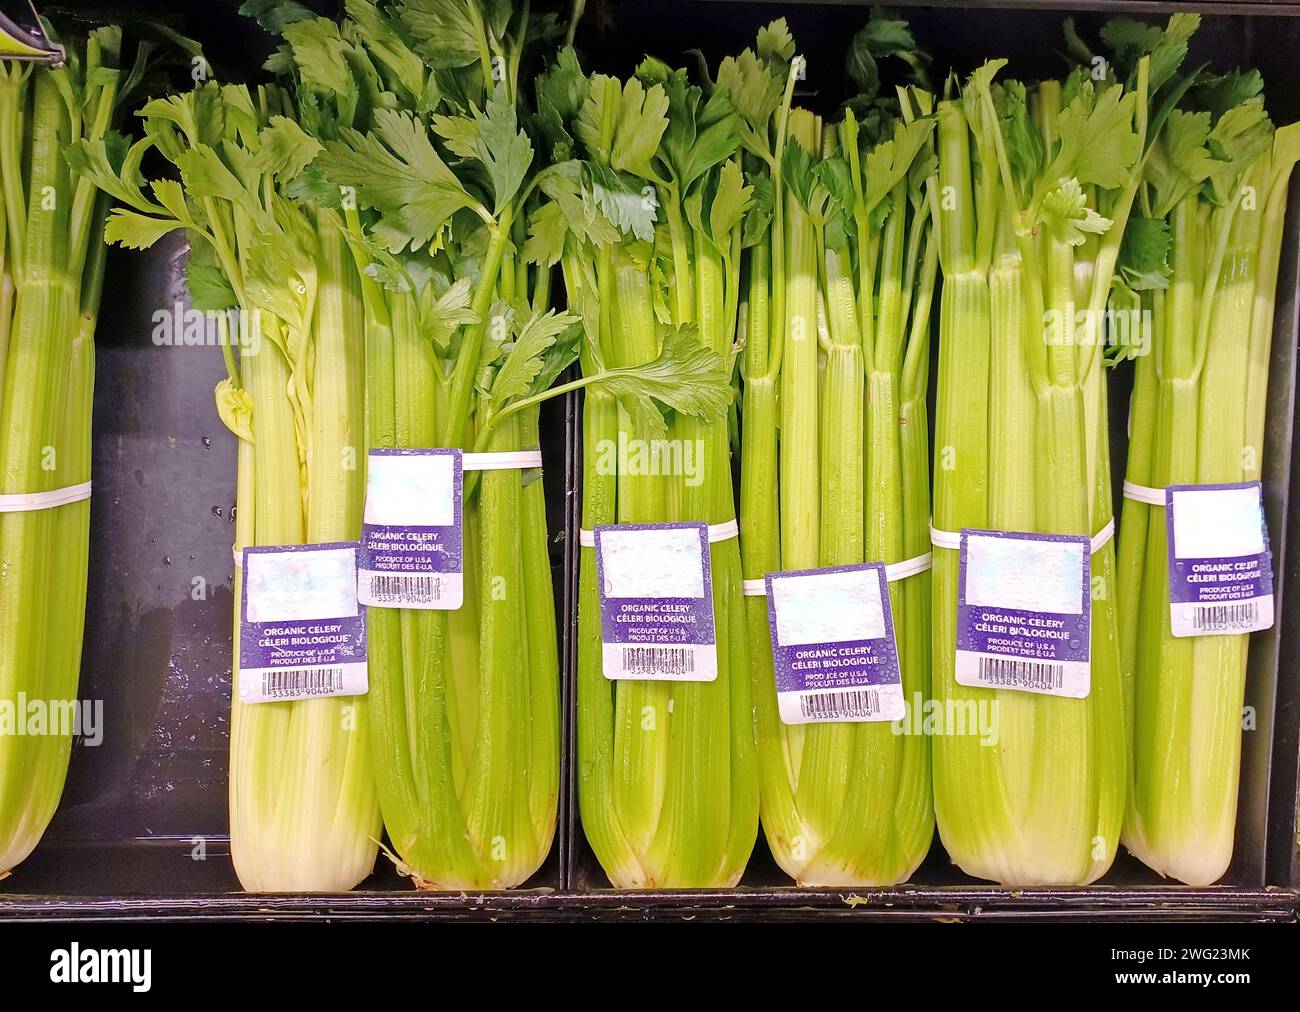 Whole celery bunches (Apium graveolens) displayed upright on a supermarket shelf. Health foods in a traditional vegetable market retail store. Stock Photo